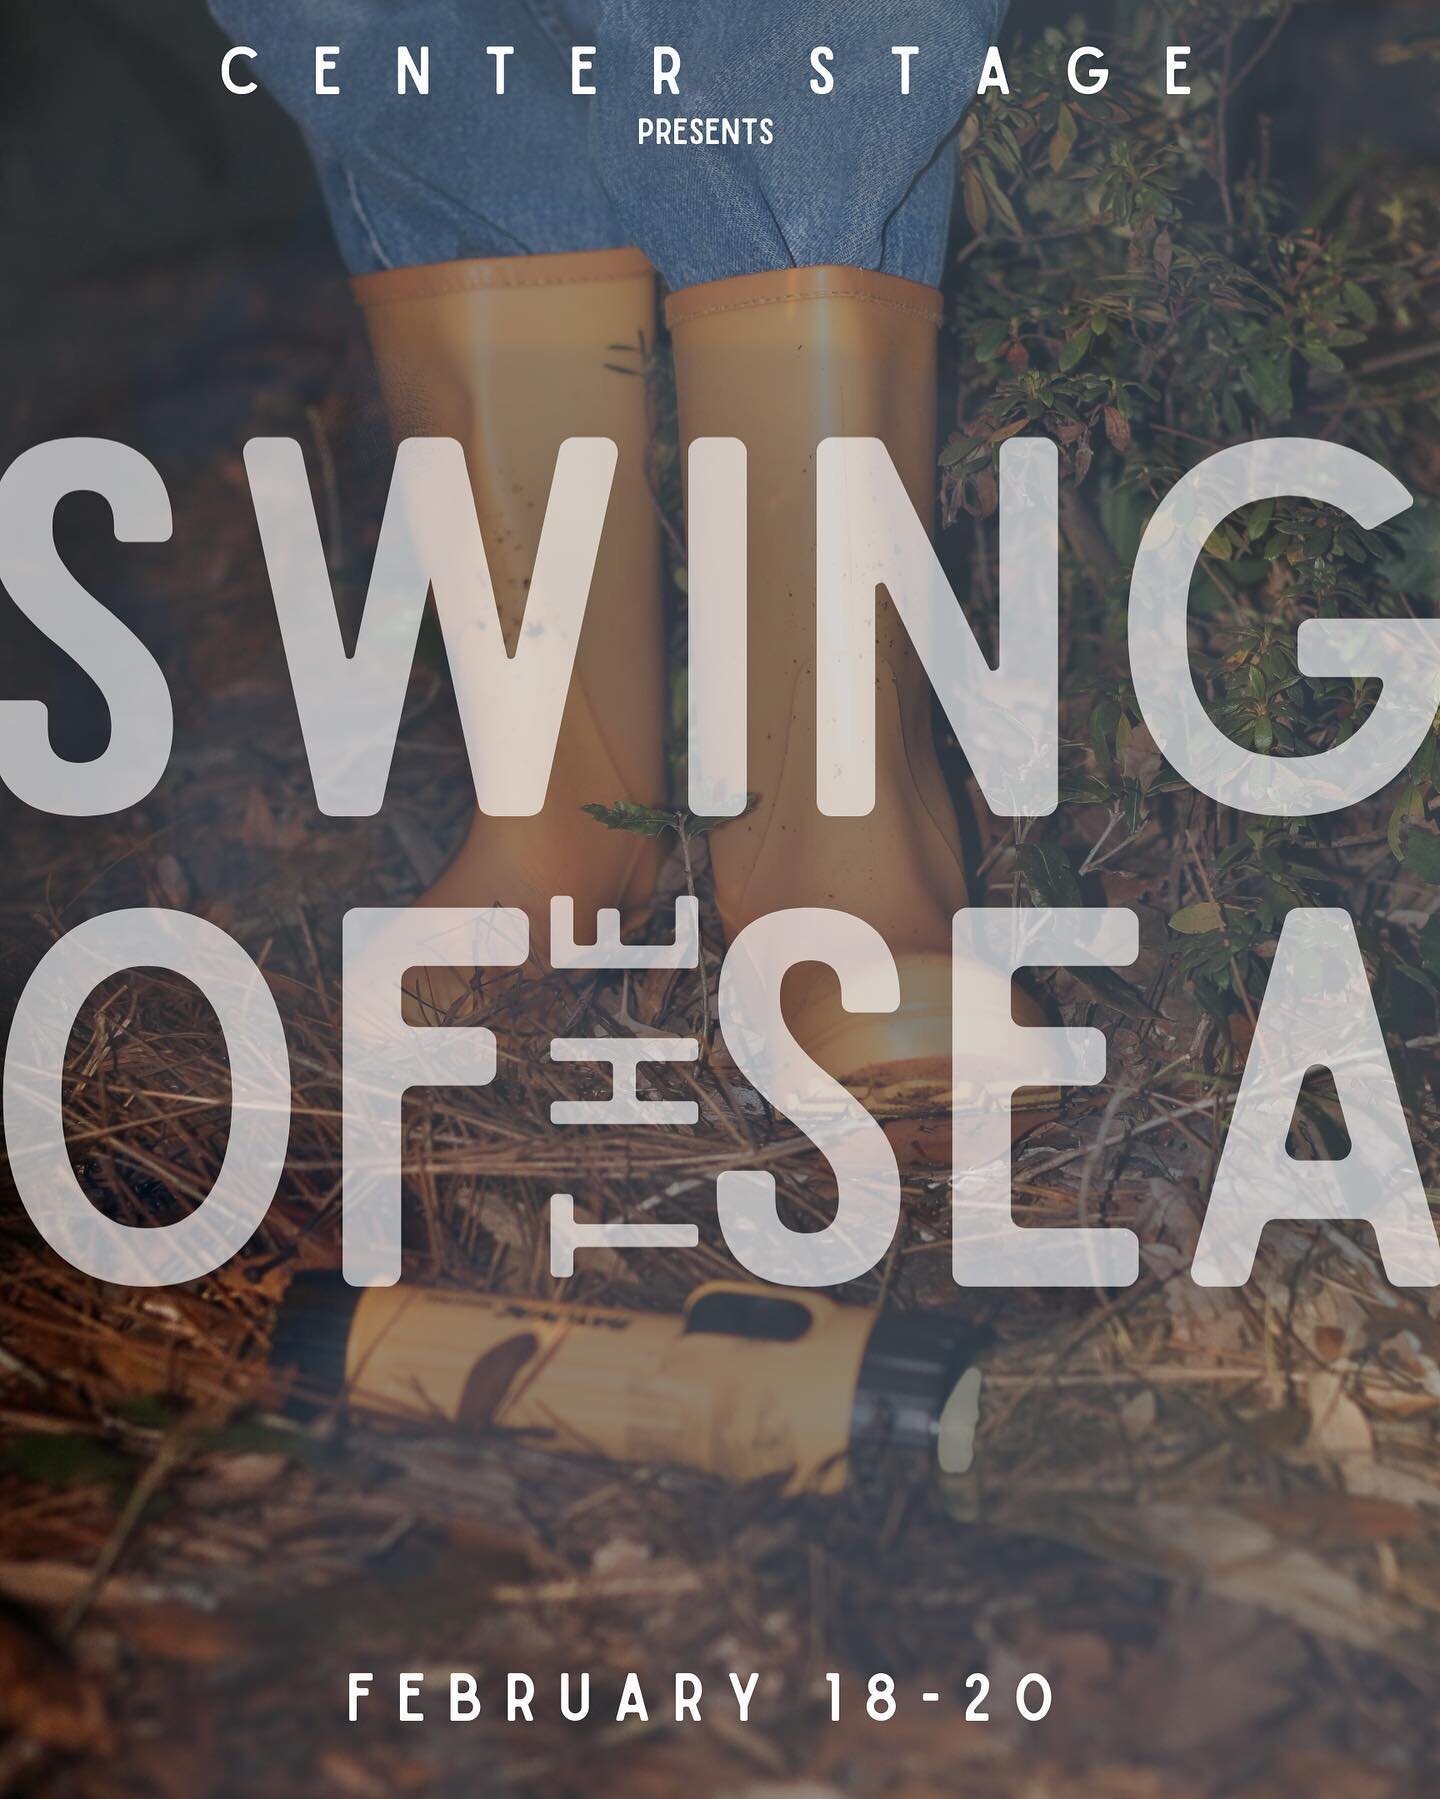 SWING OF THE SEA

Tickets available at the link in our bio!